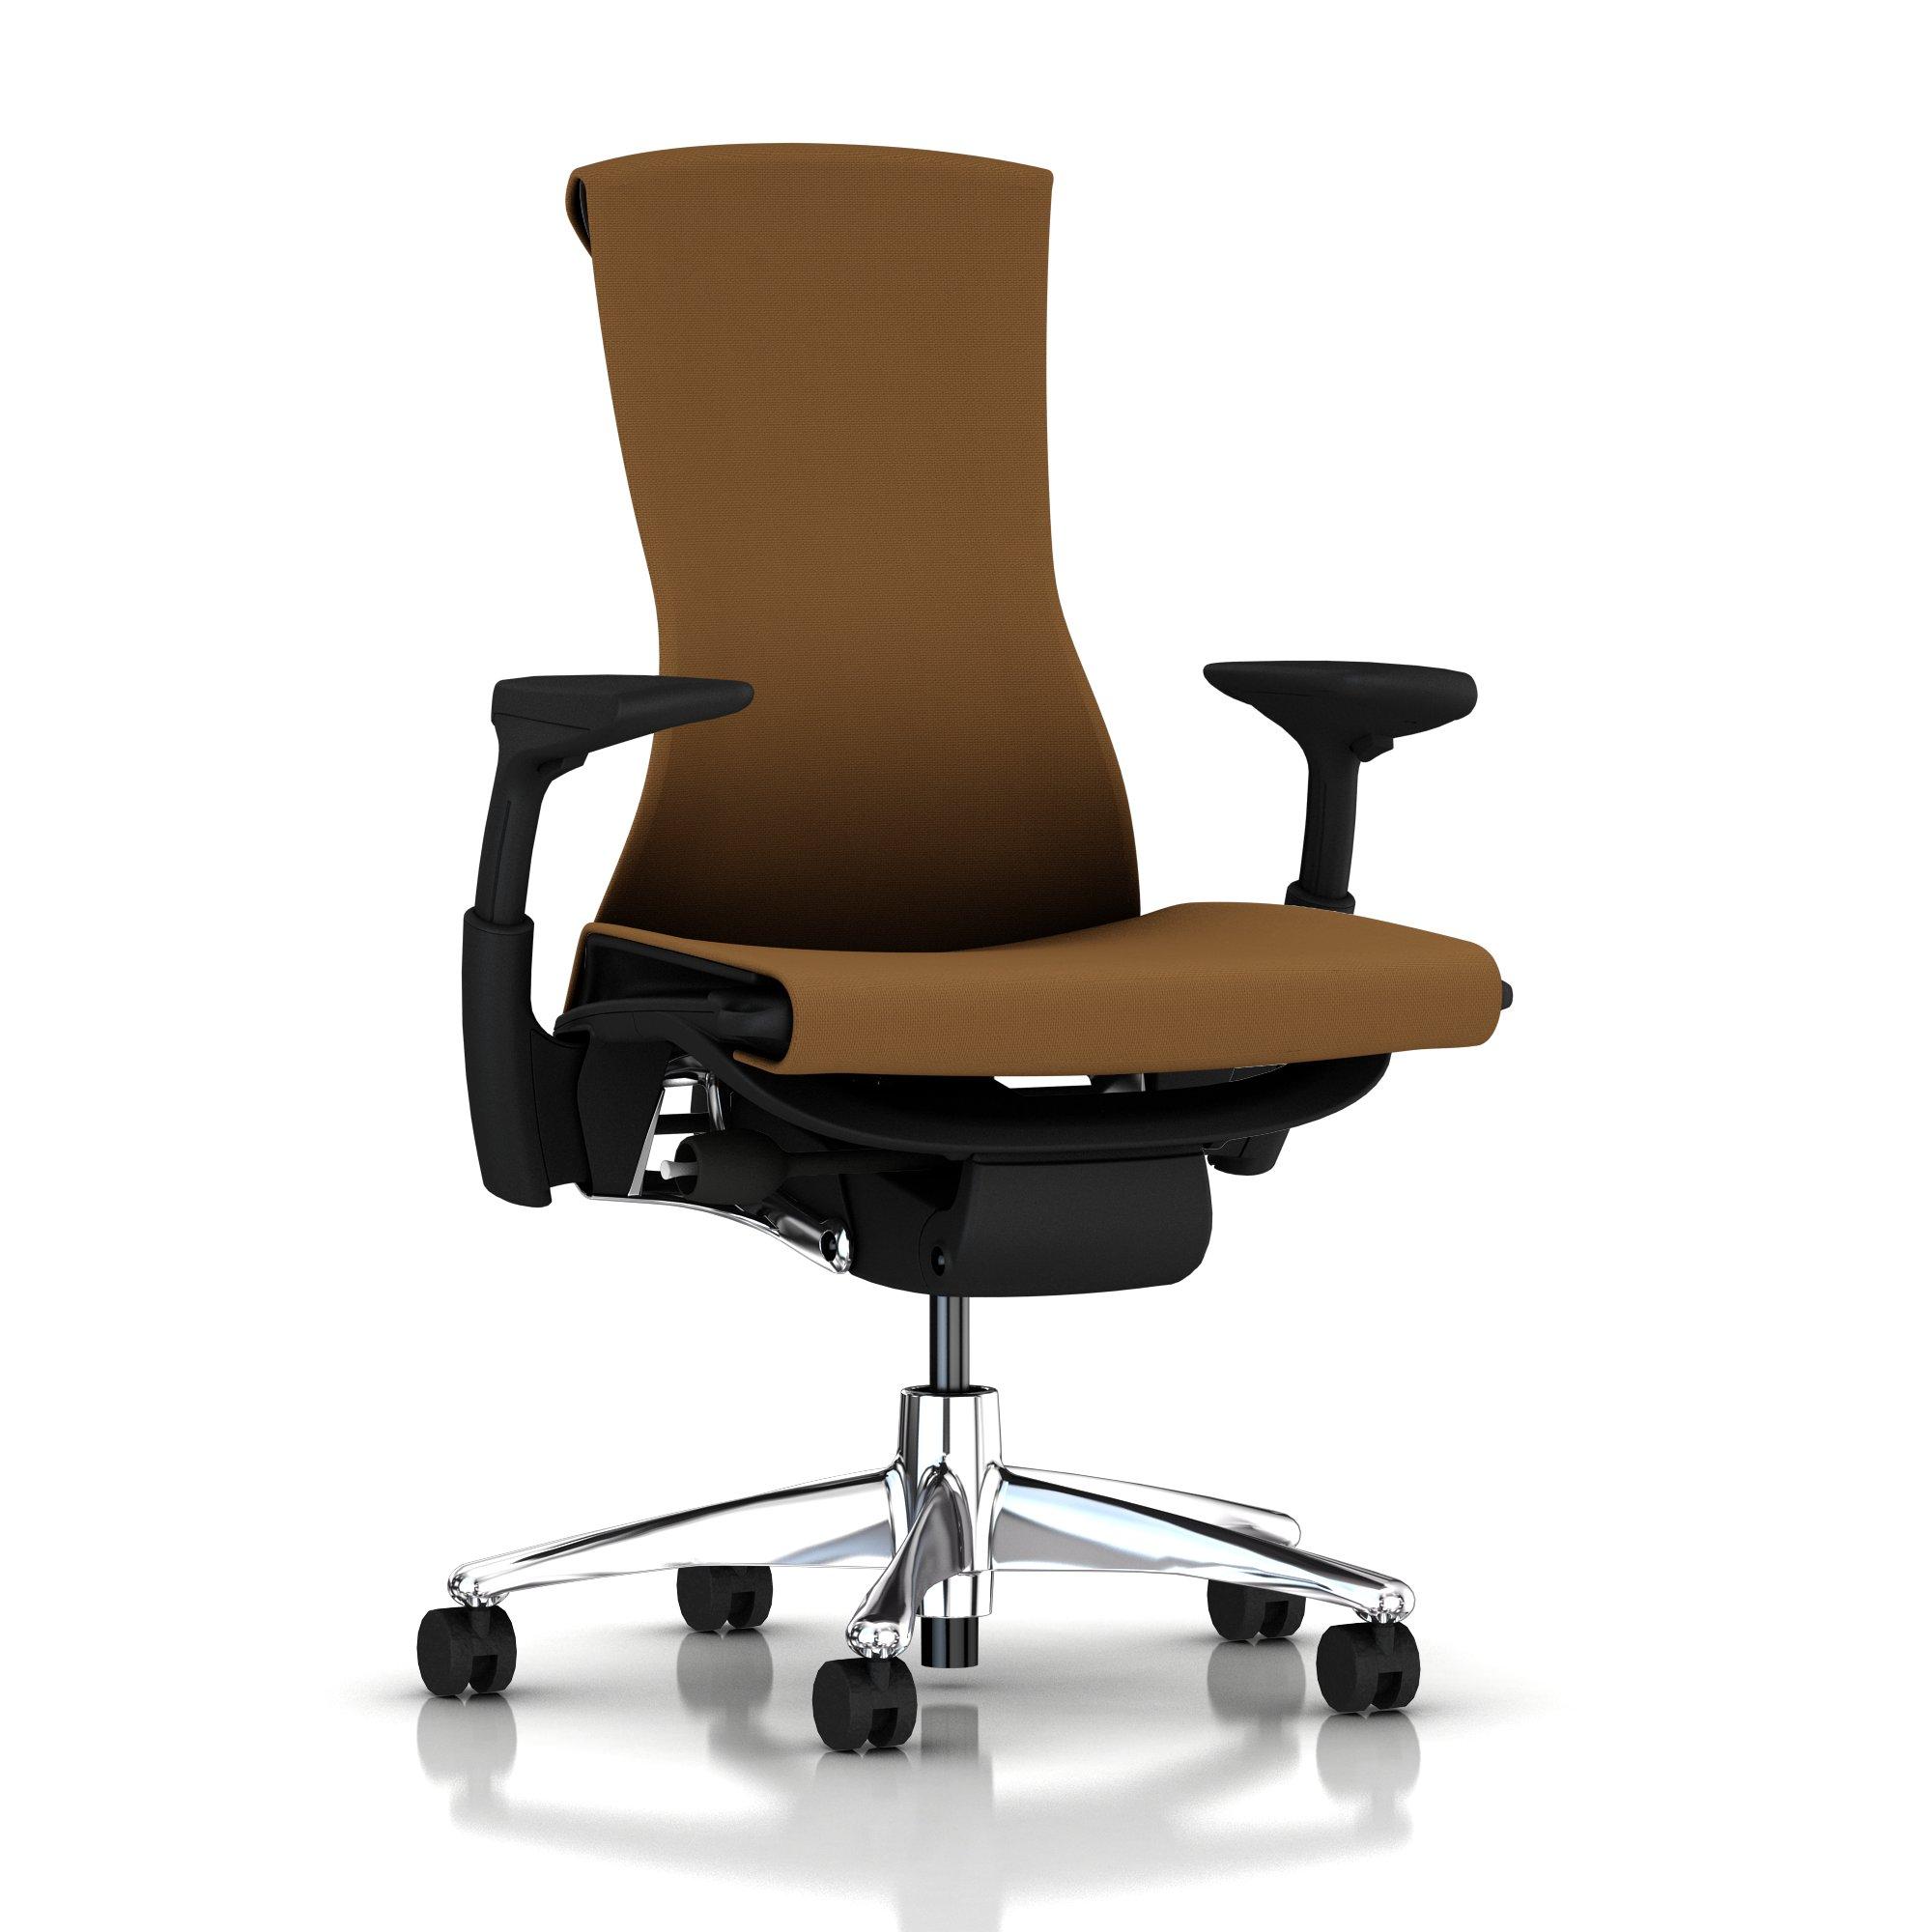 Embody Chair Molasses Rhythm with Graphite Frame Aluminum Base by Herman Miller